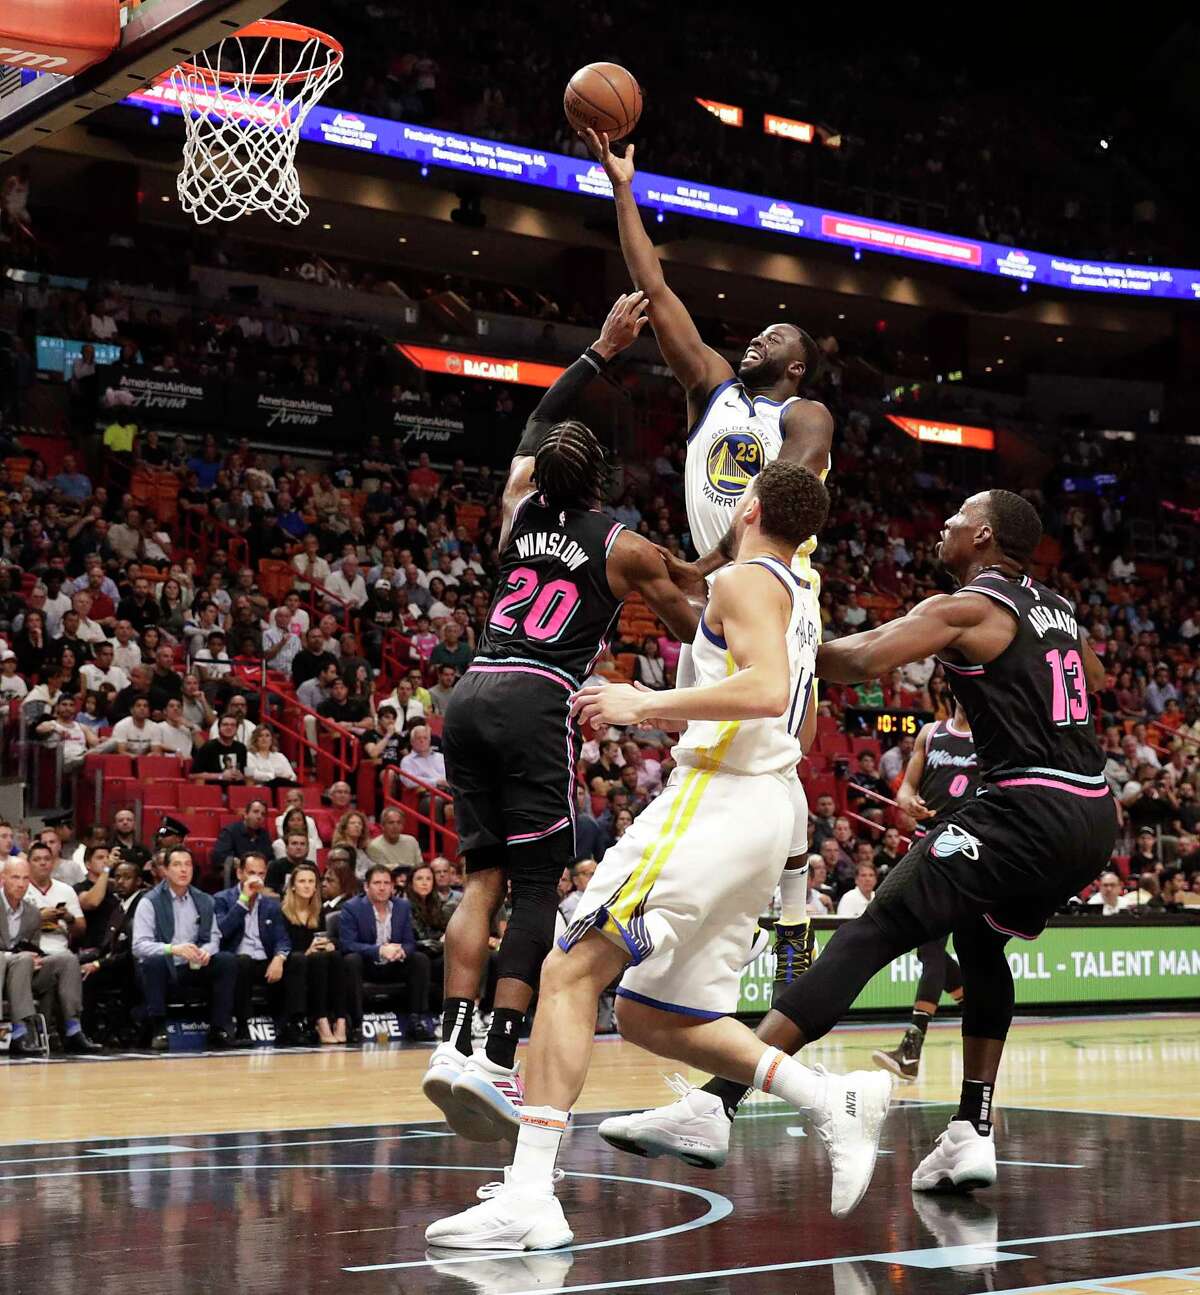 Golden State Warriors forward Draymond Green (23) shoots the ball against Miami Heat forward Justise Winslow (20) during the first half of an NBA basketball game Wednesday, Feb. 27, 2019, in Miami.